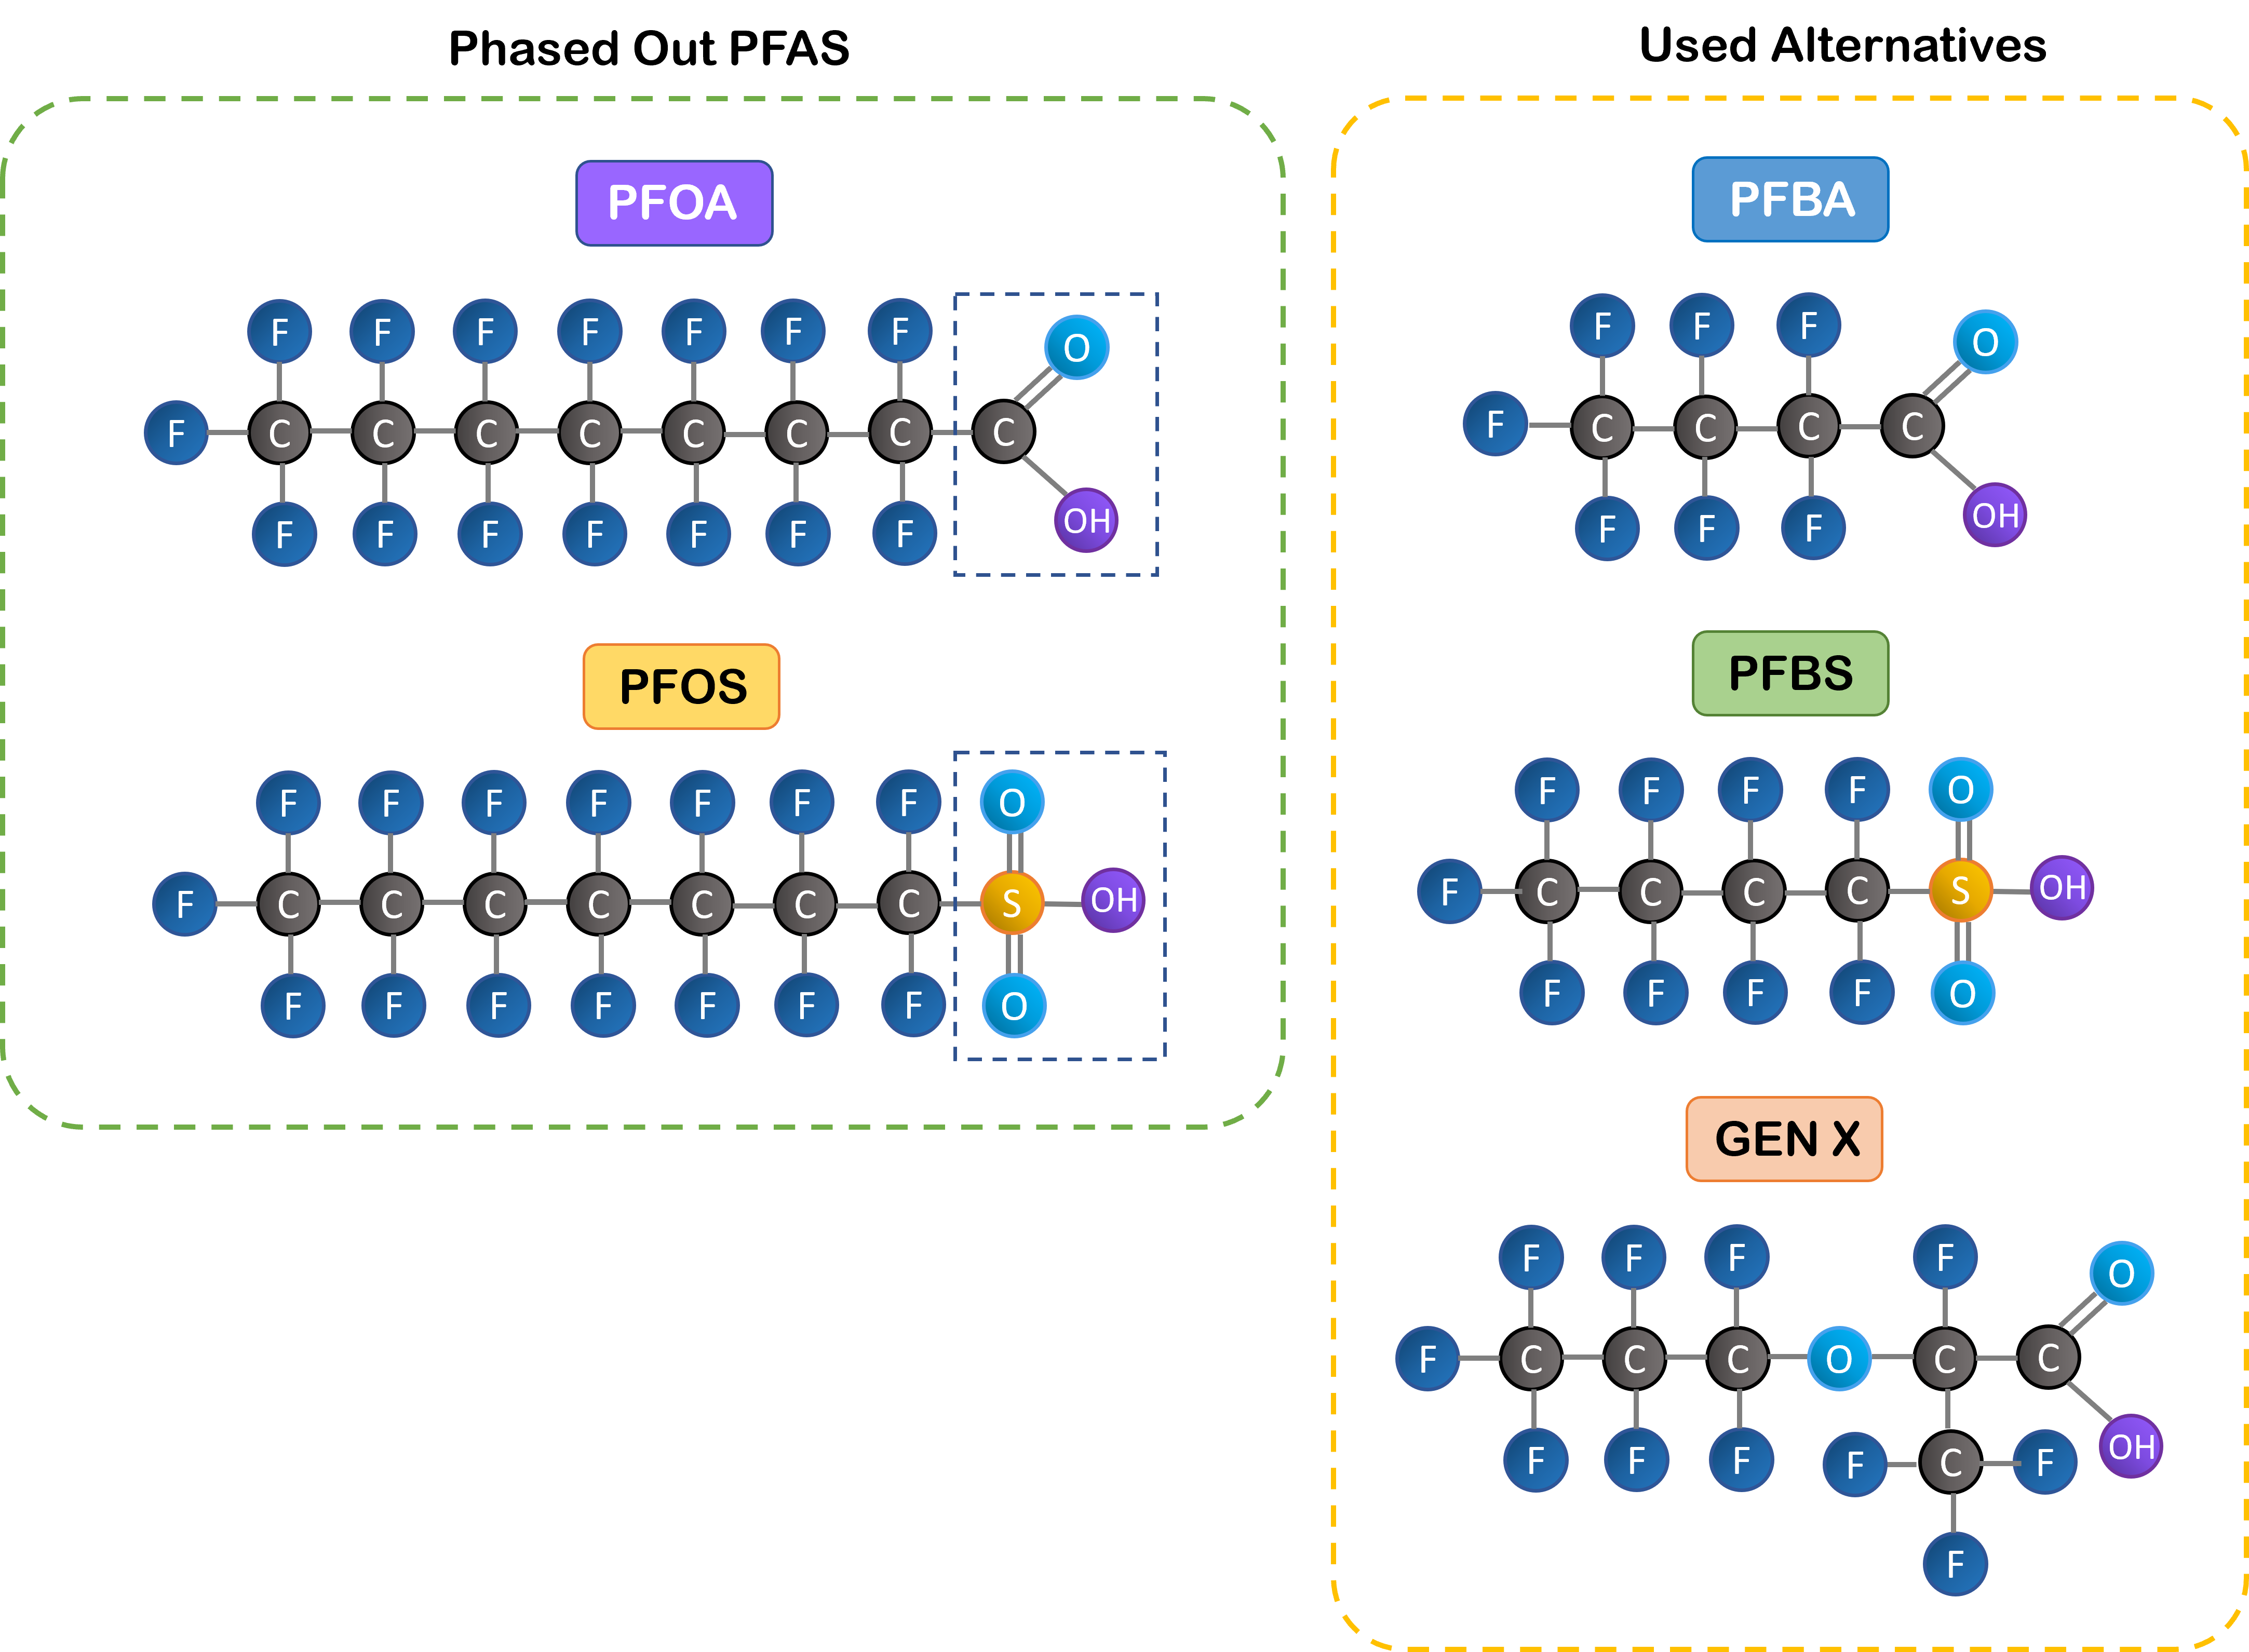 Chemical structures of two of the most common PFAS that are now phased-out in many regions and the alternative short-chain PFAS that are being used in their place. © Wasser 3.0